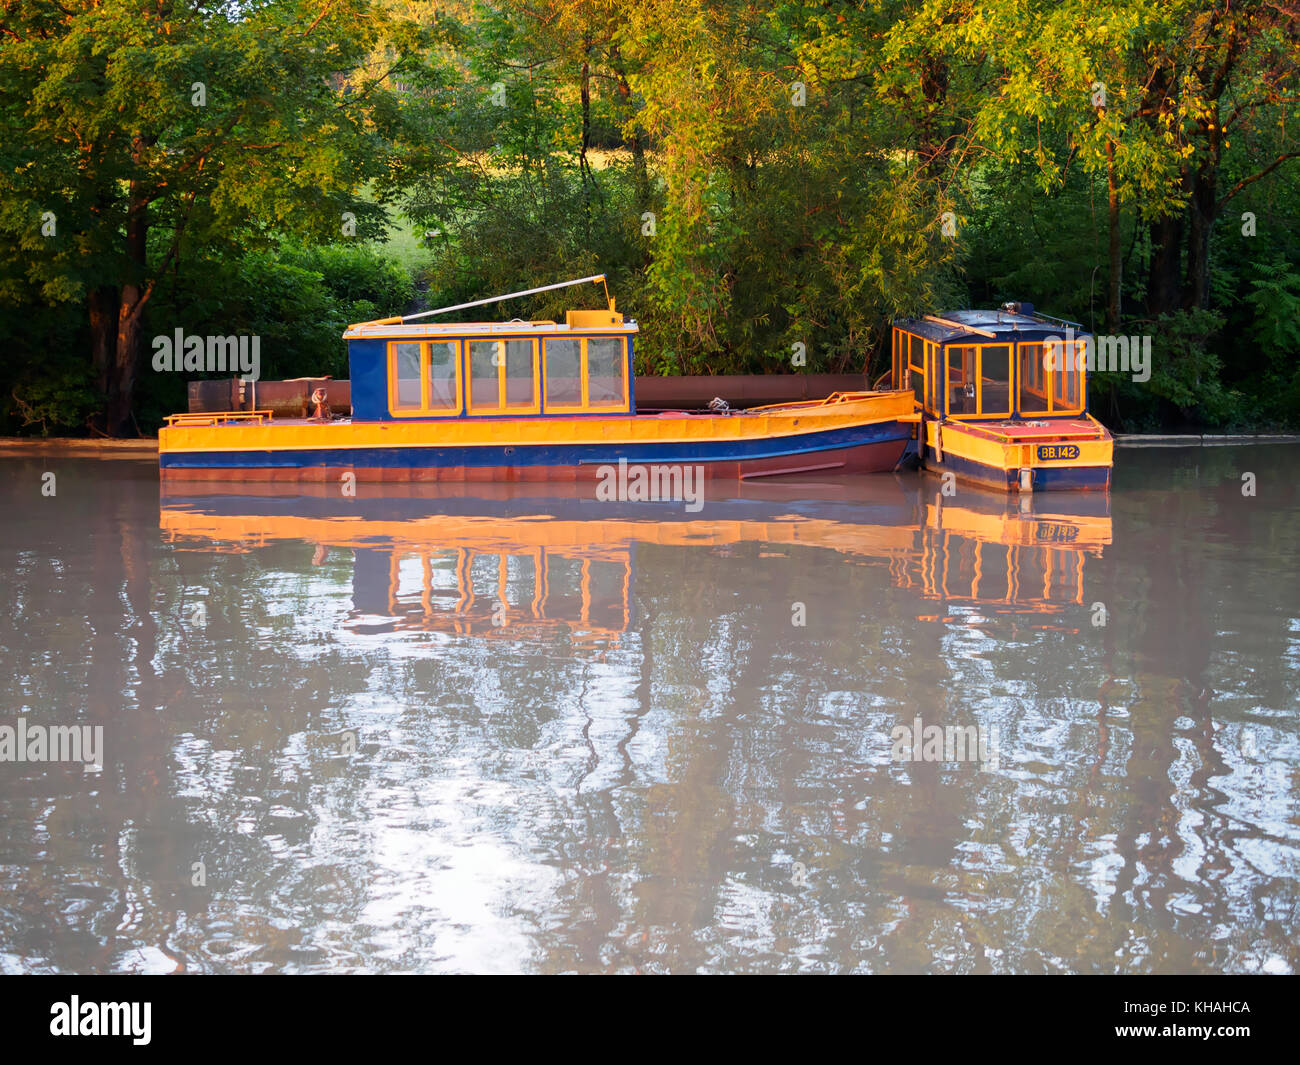 Workboats on the Erie Canal. Buoy boats were once used to transport worker to light floating buoys. Stock Photo